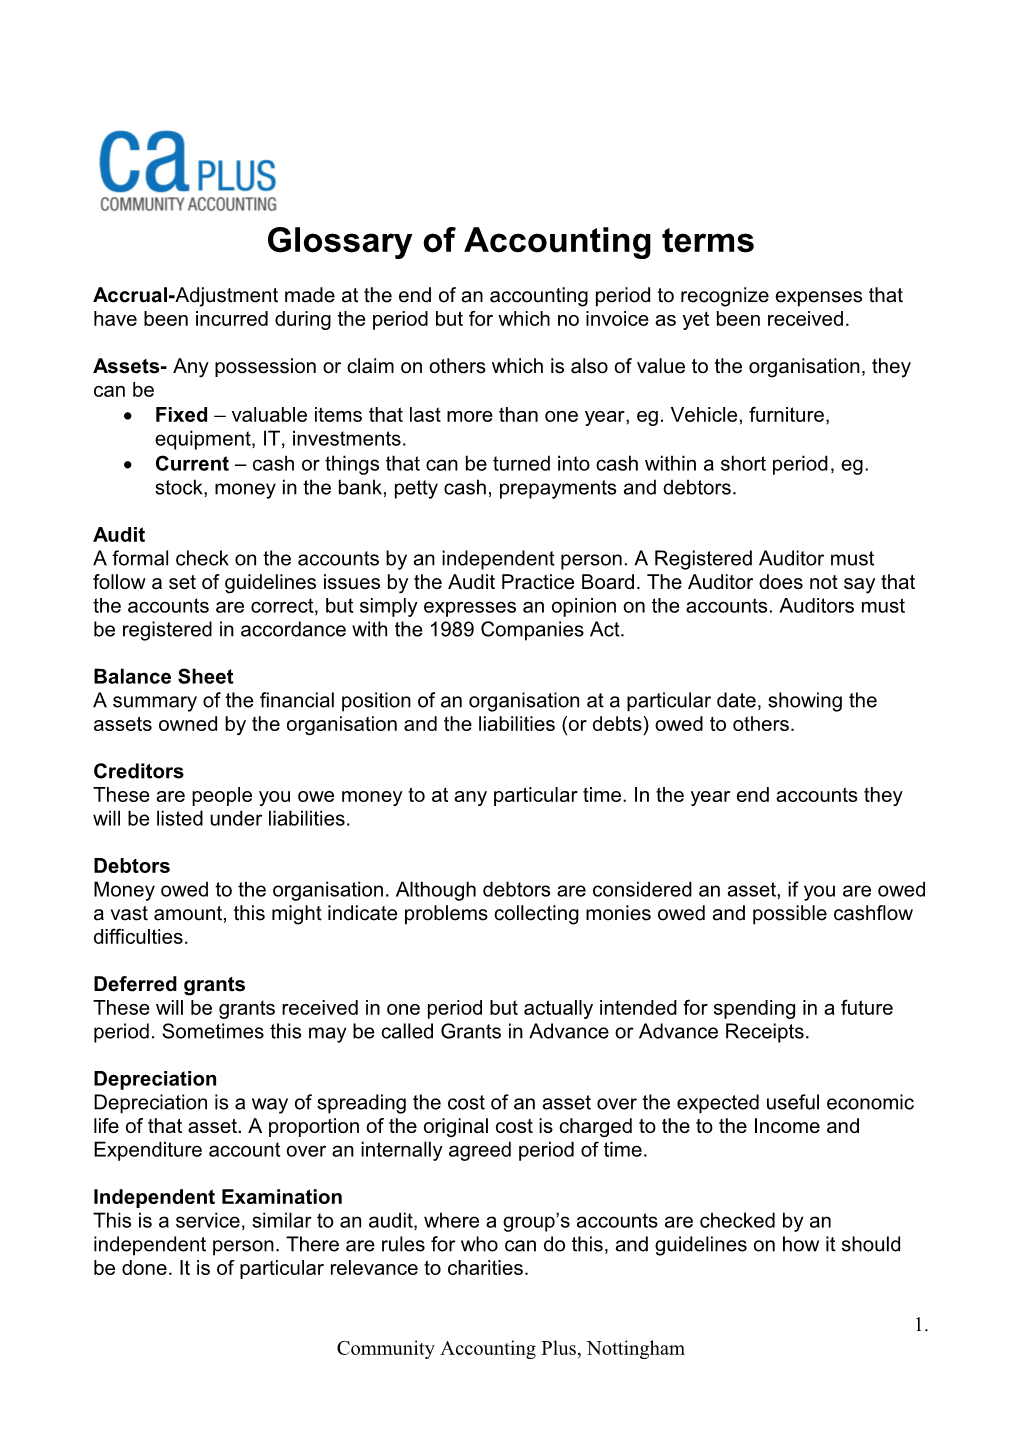 Glossary of Accounting Terms